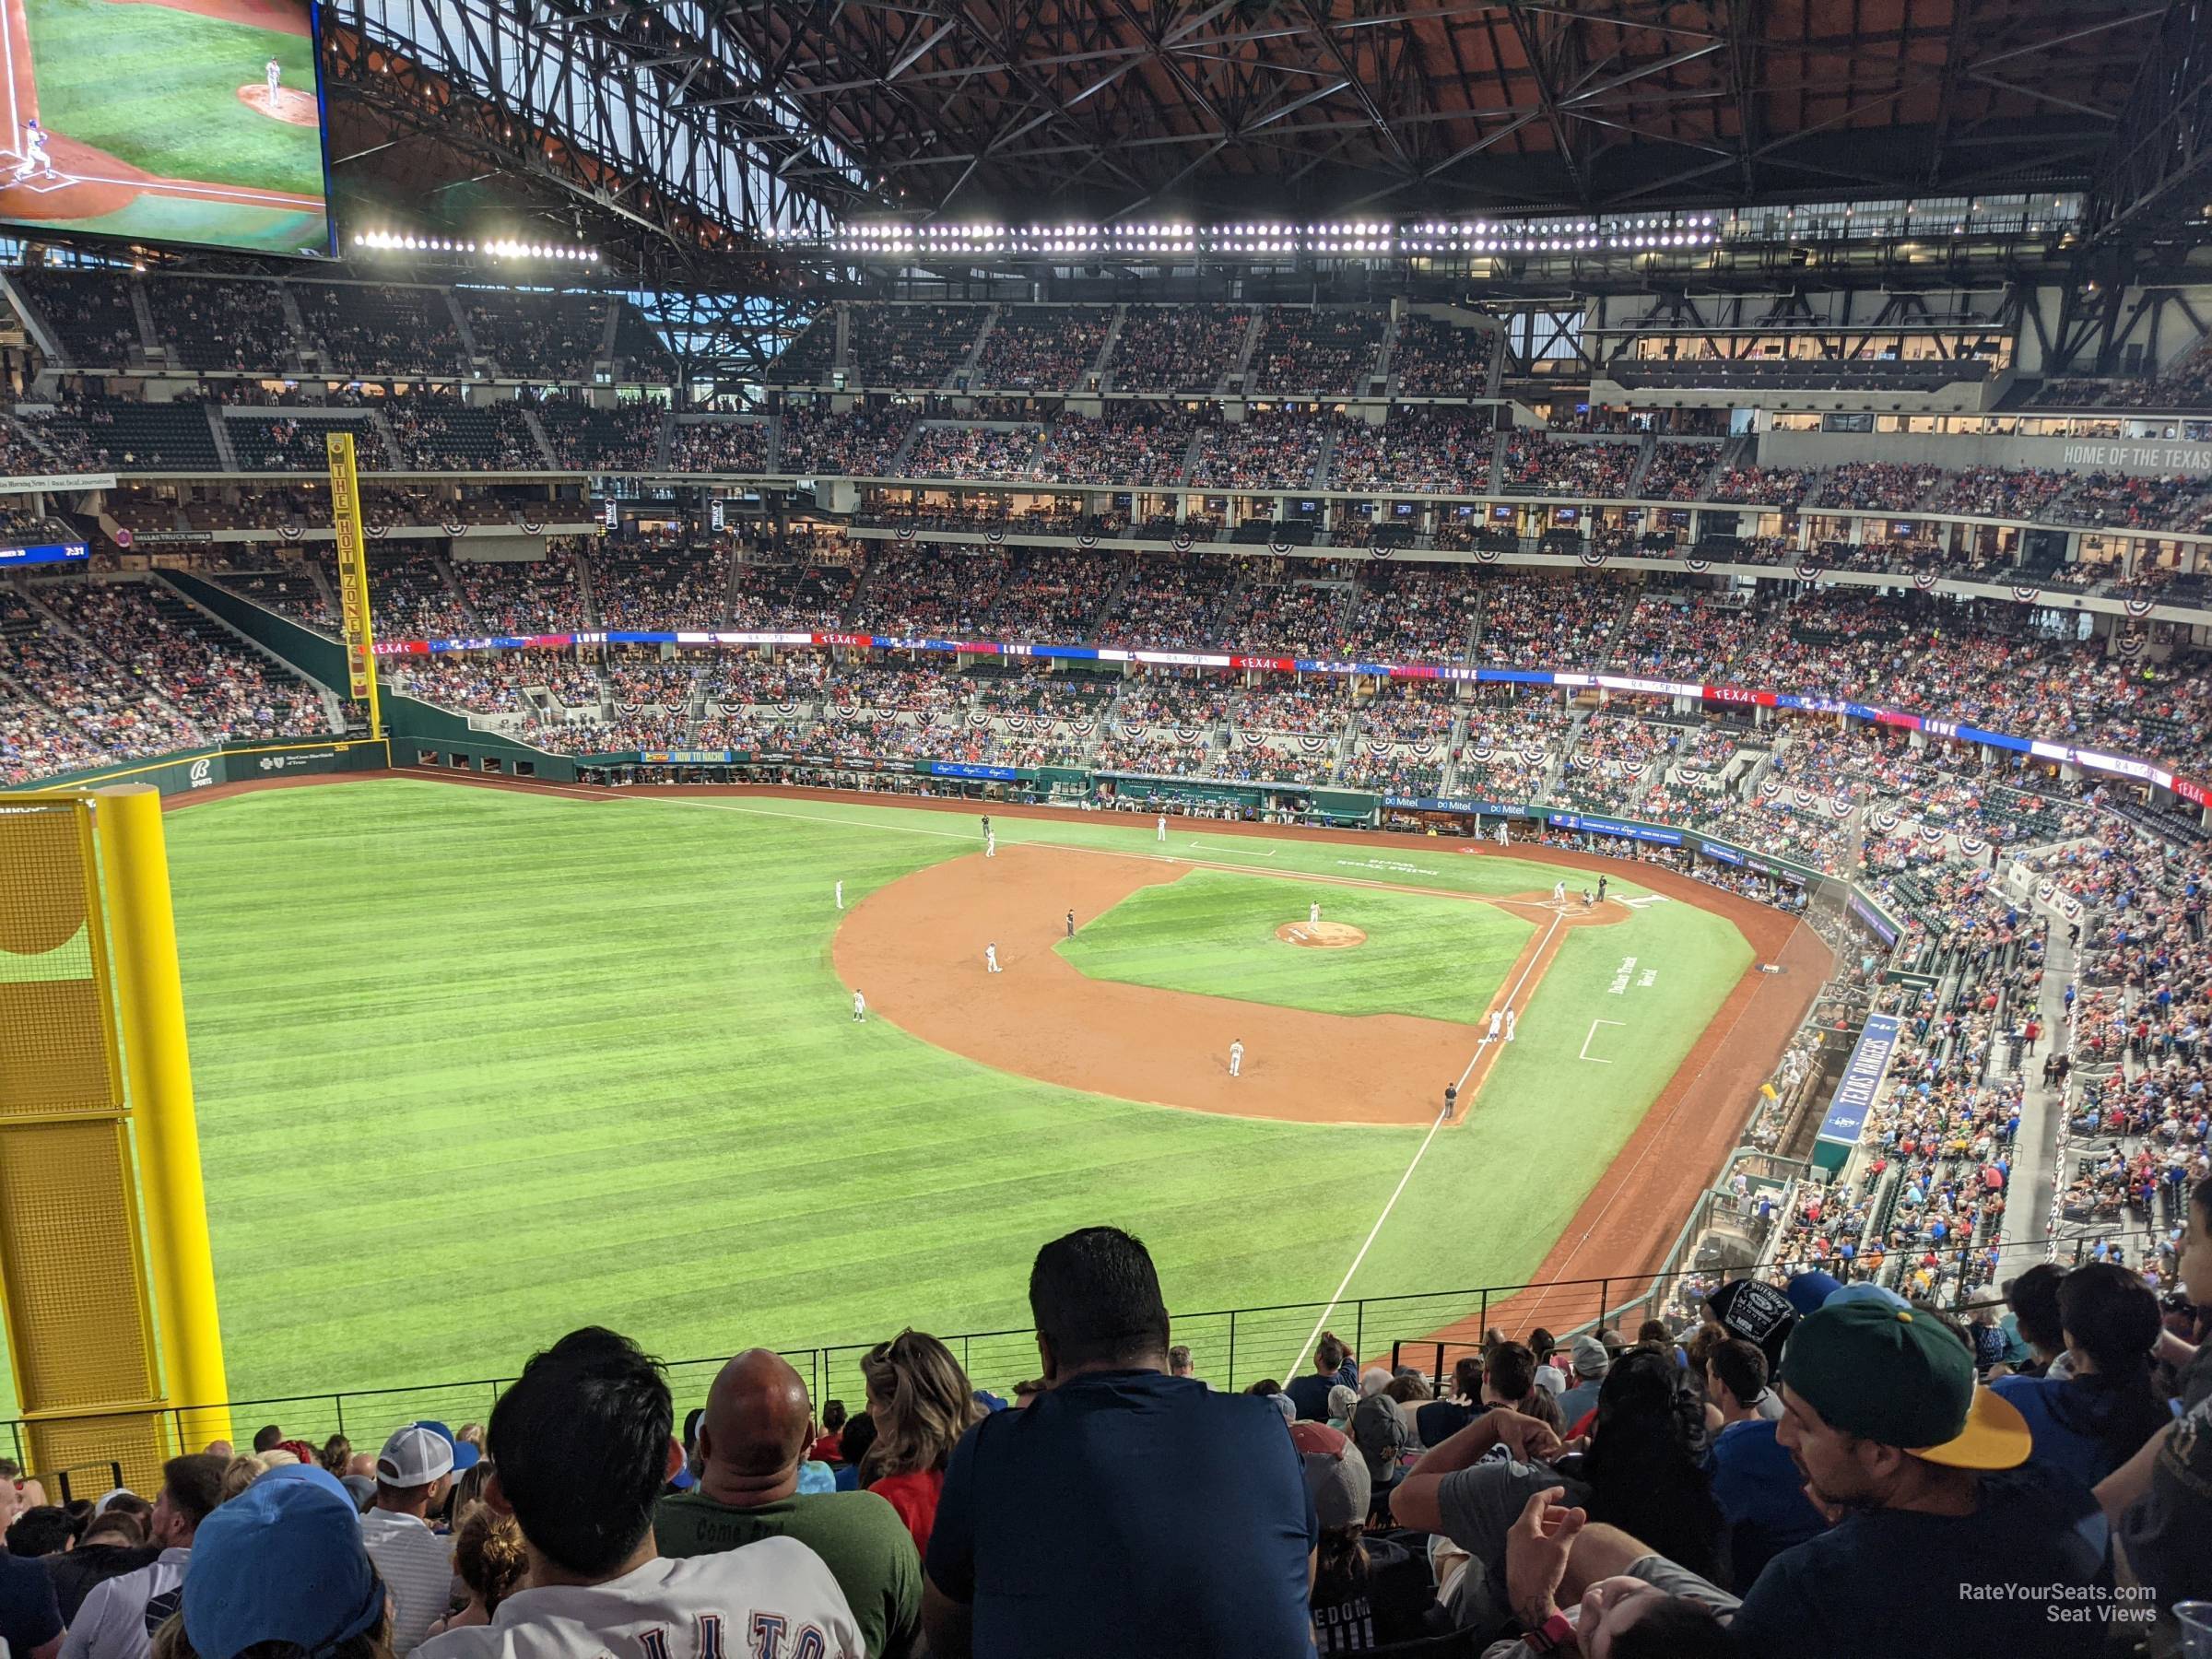 Section 202 at Globe Life Field